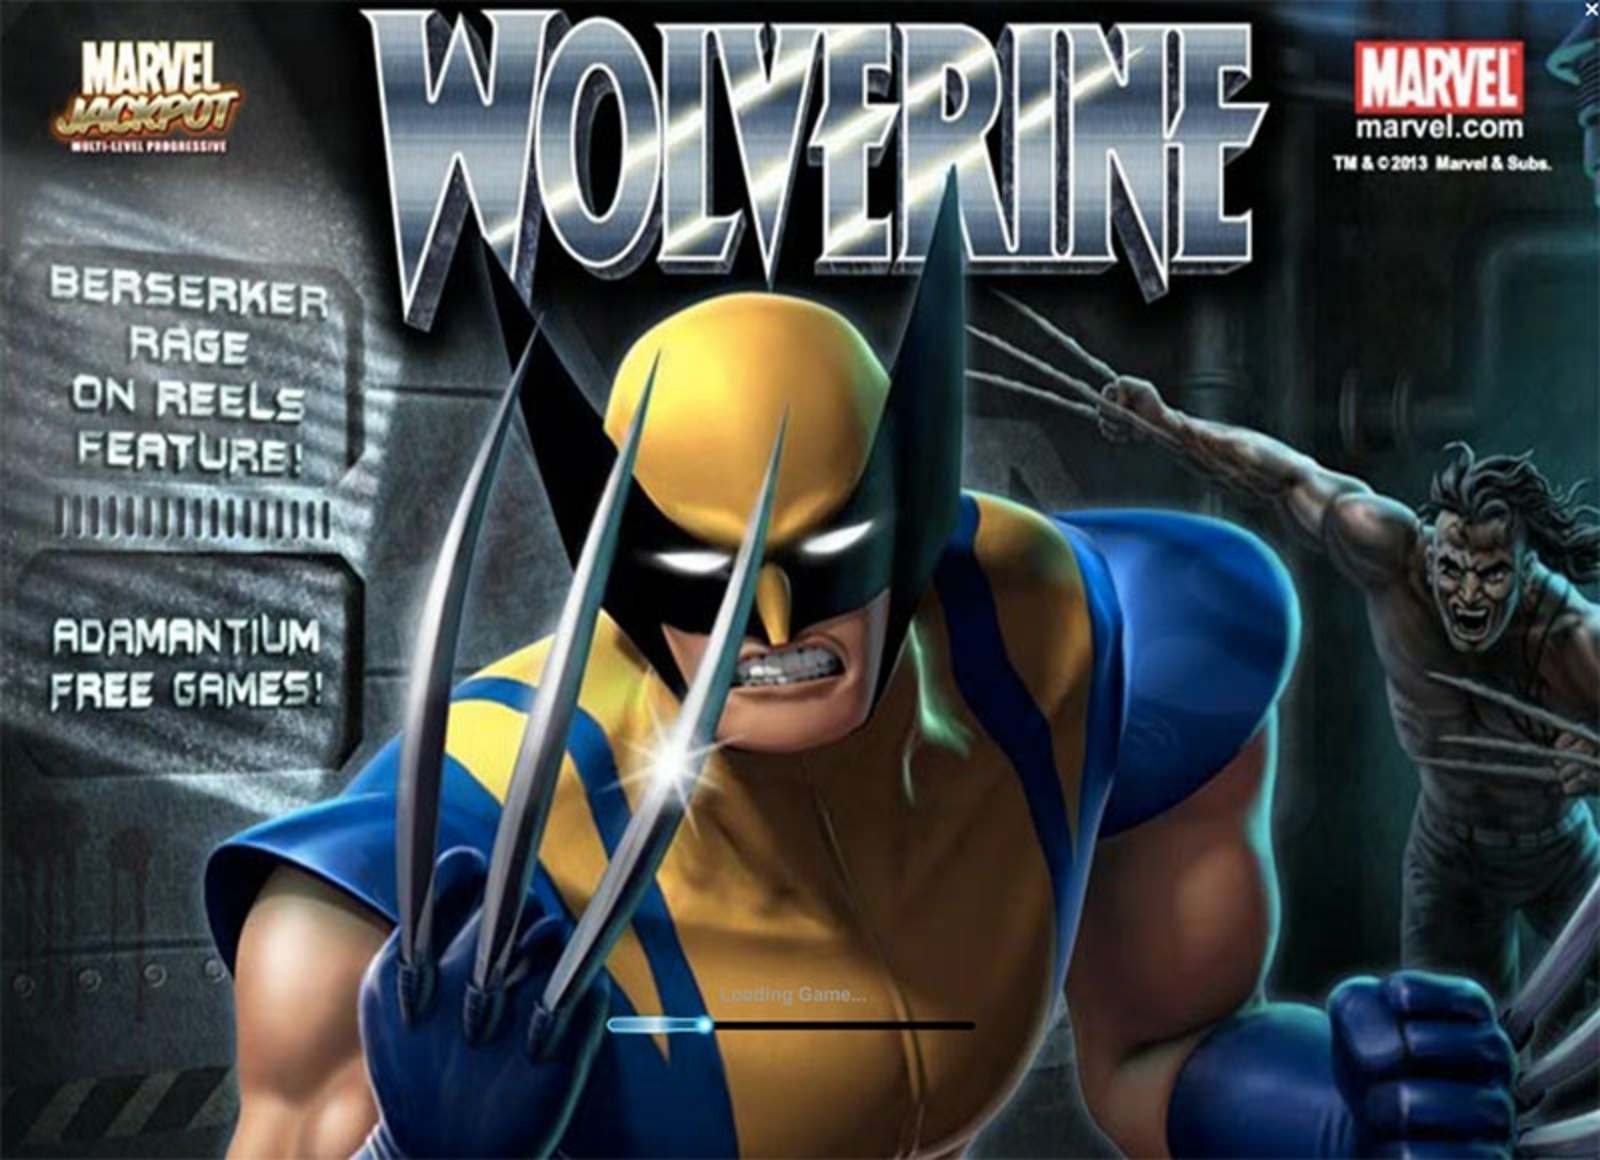 The Wolverine Online Slot Demo Game by Playtech